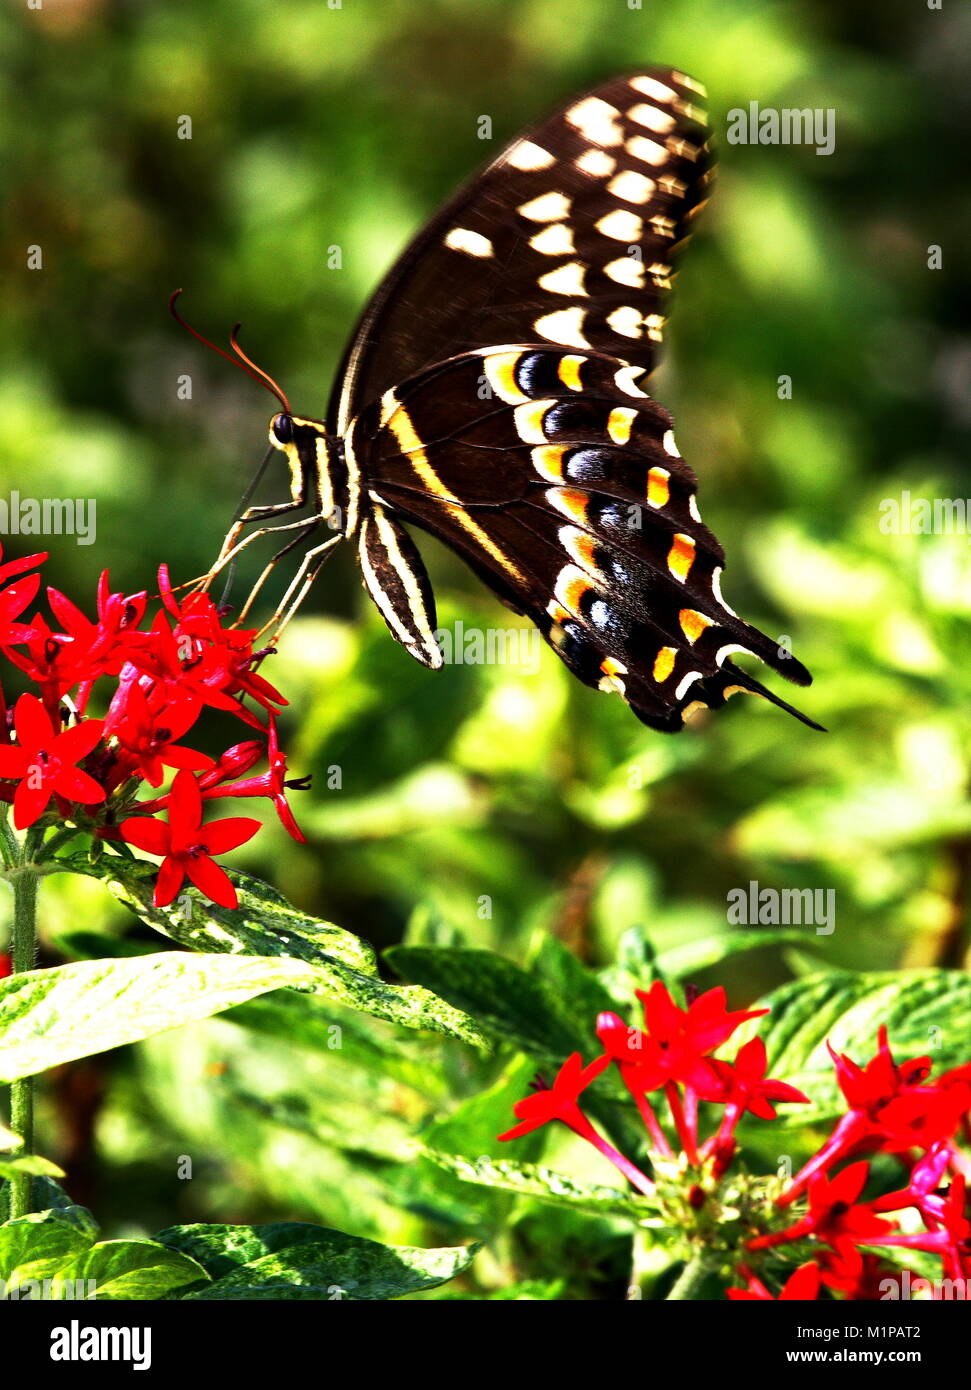 Swallowtail butterfly gathering nectar from red flower in butterfly garden. Stock Photo